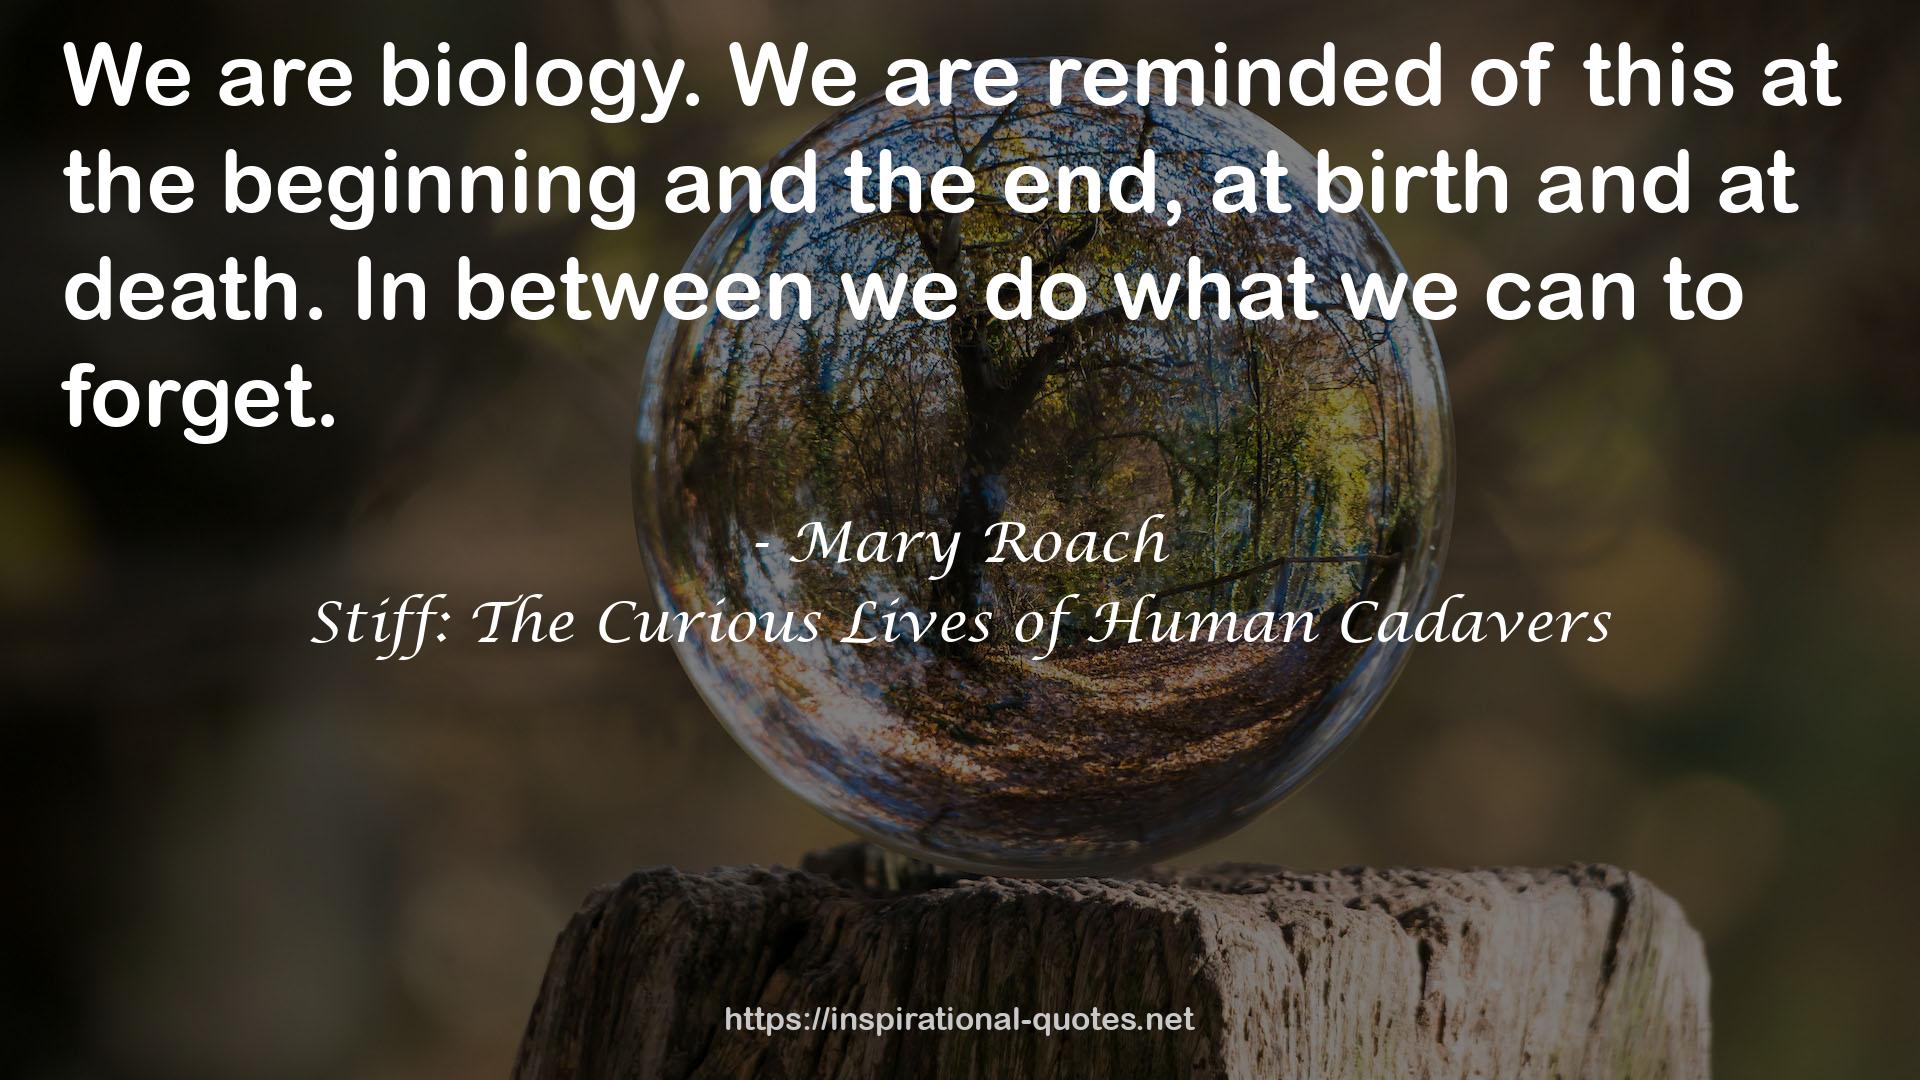 Mary Roach QUOTES